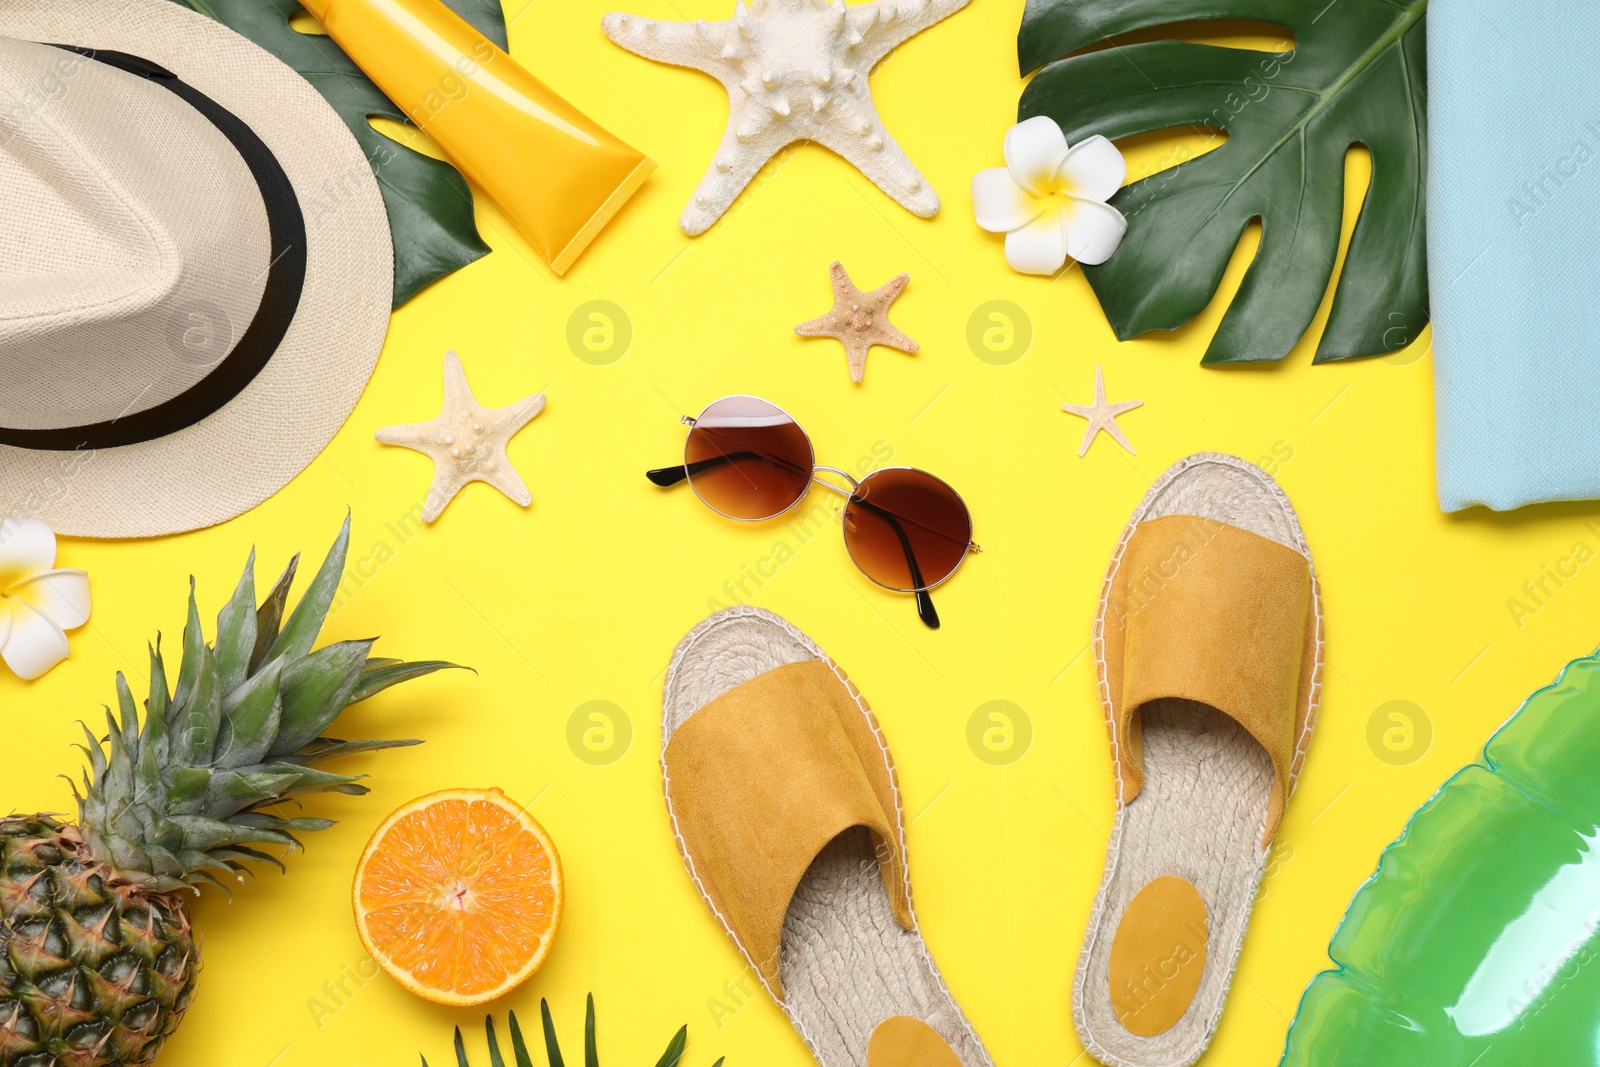 Photo of Beach accessories on yellow background, flat lay